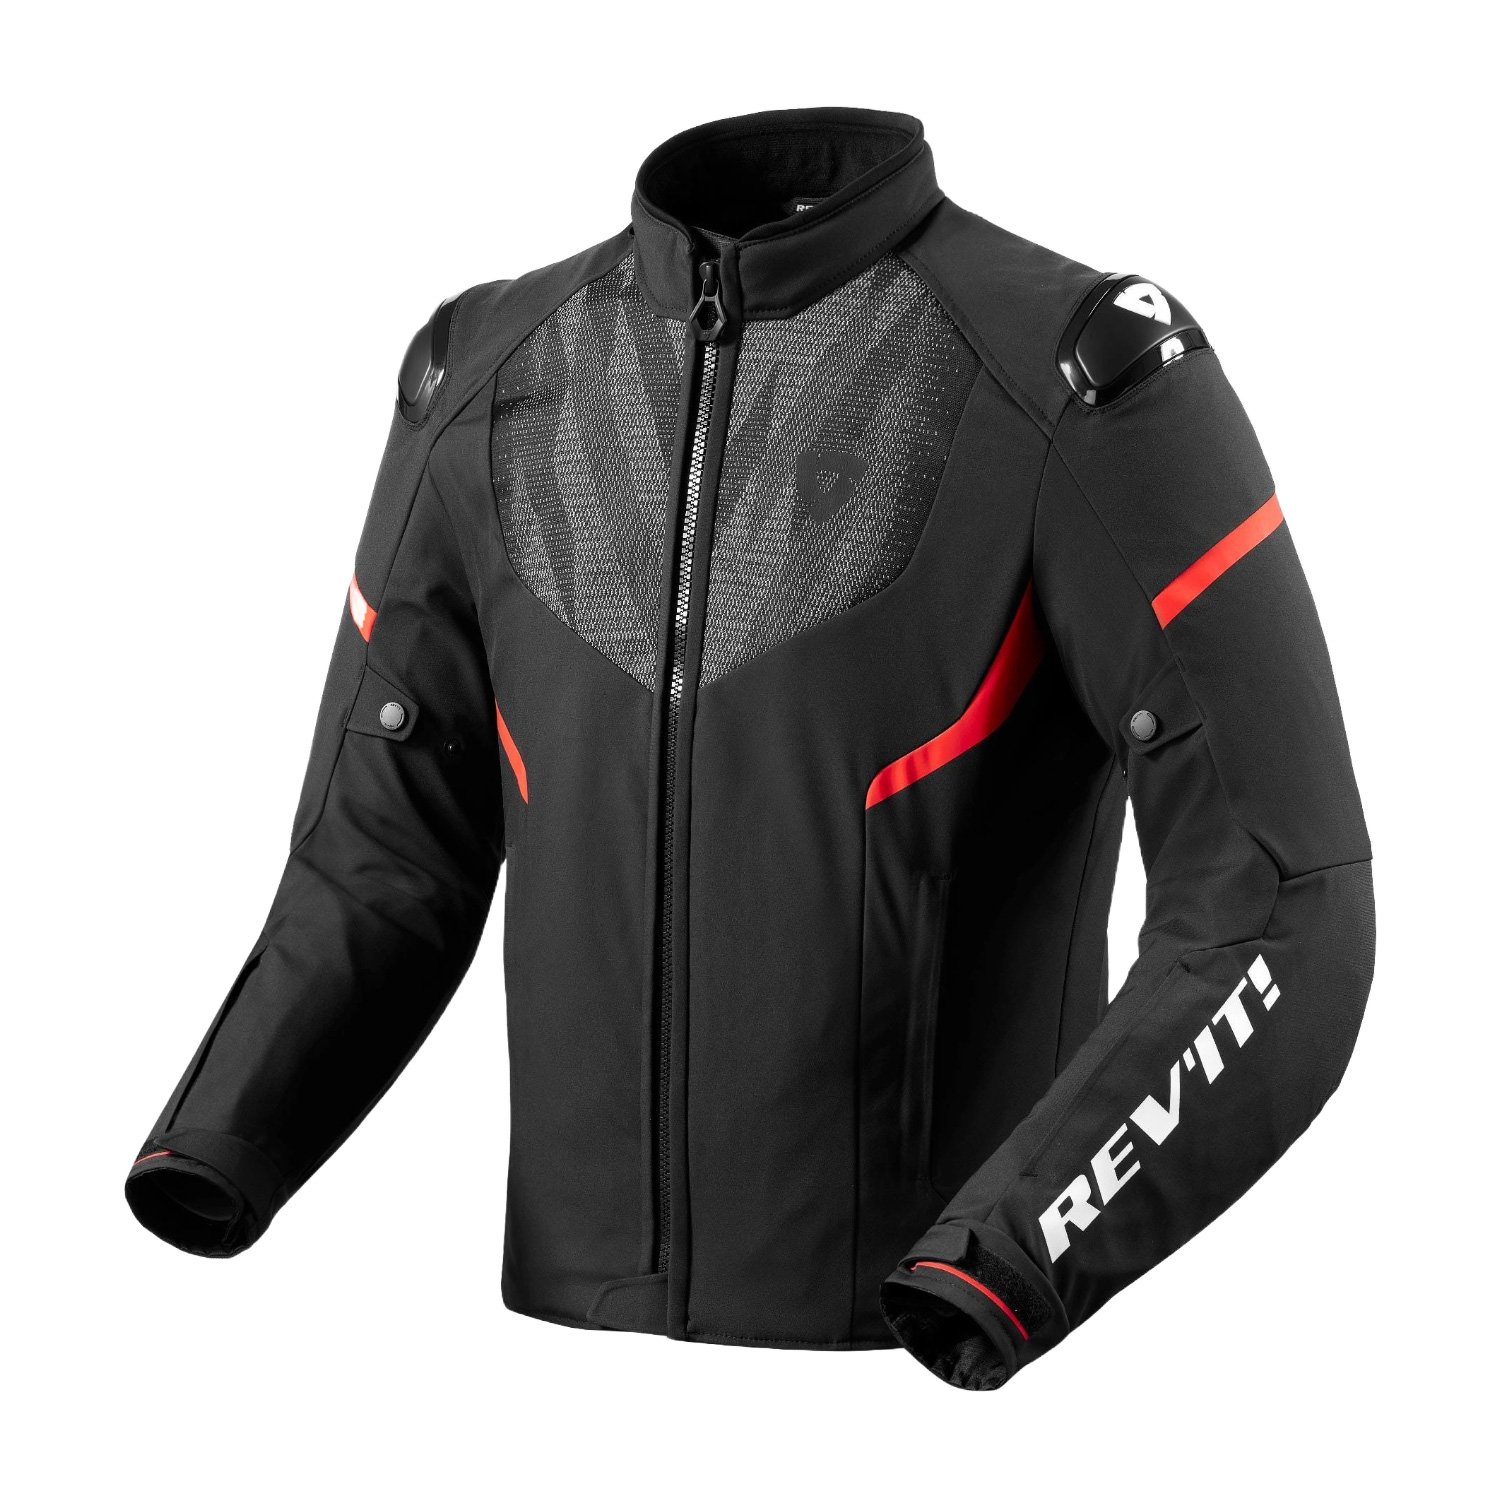 Image of REV'IT! Hyperspeed 2 H2O Noir Neon Rouge Blouson Taille 3XL